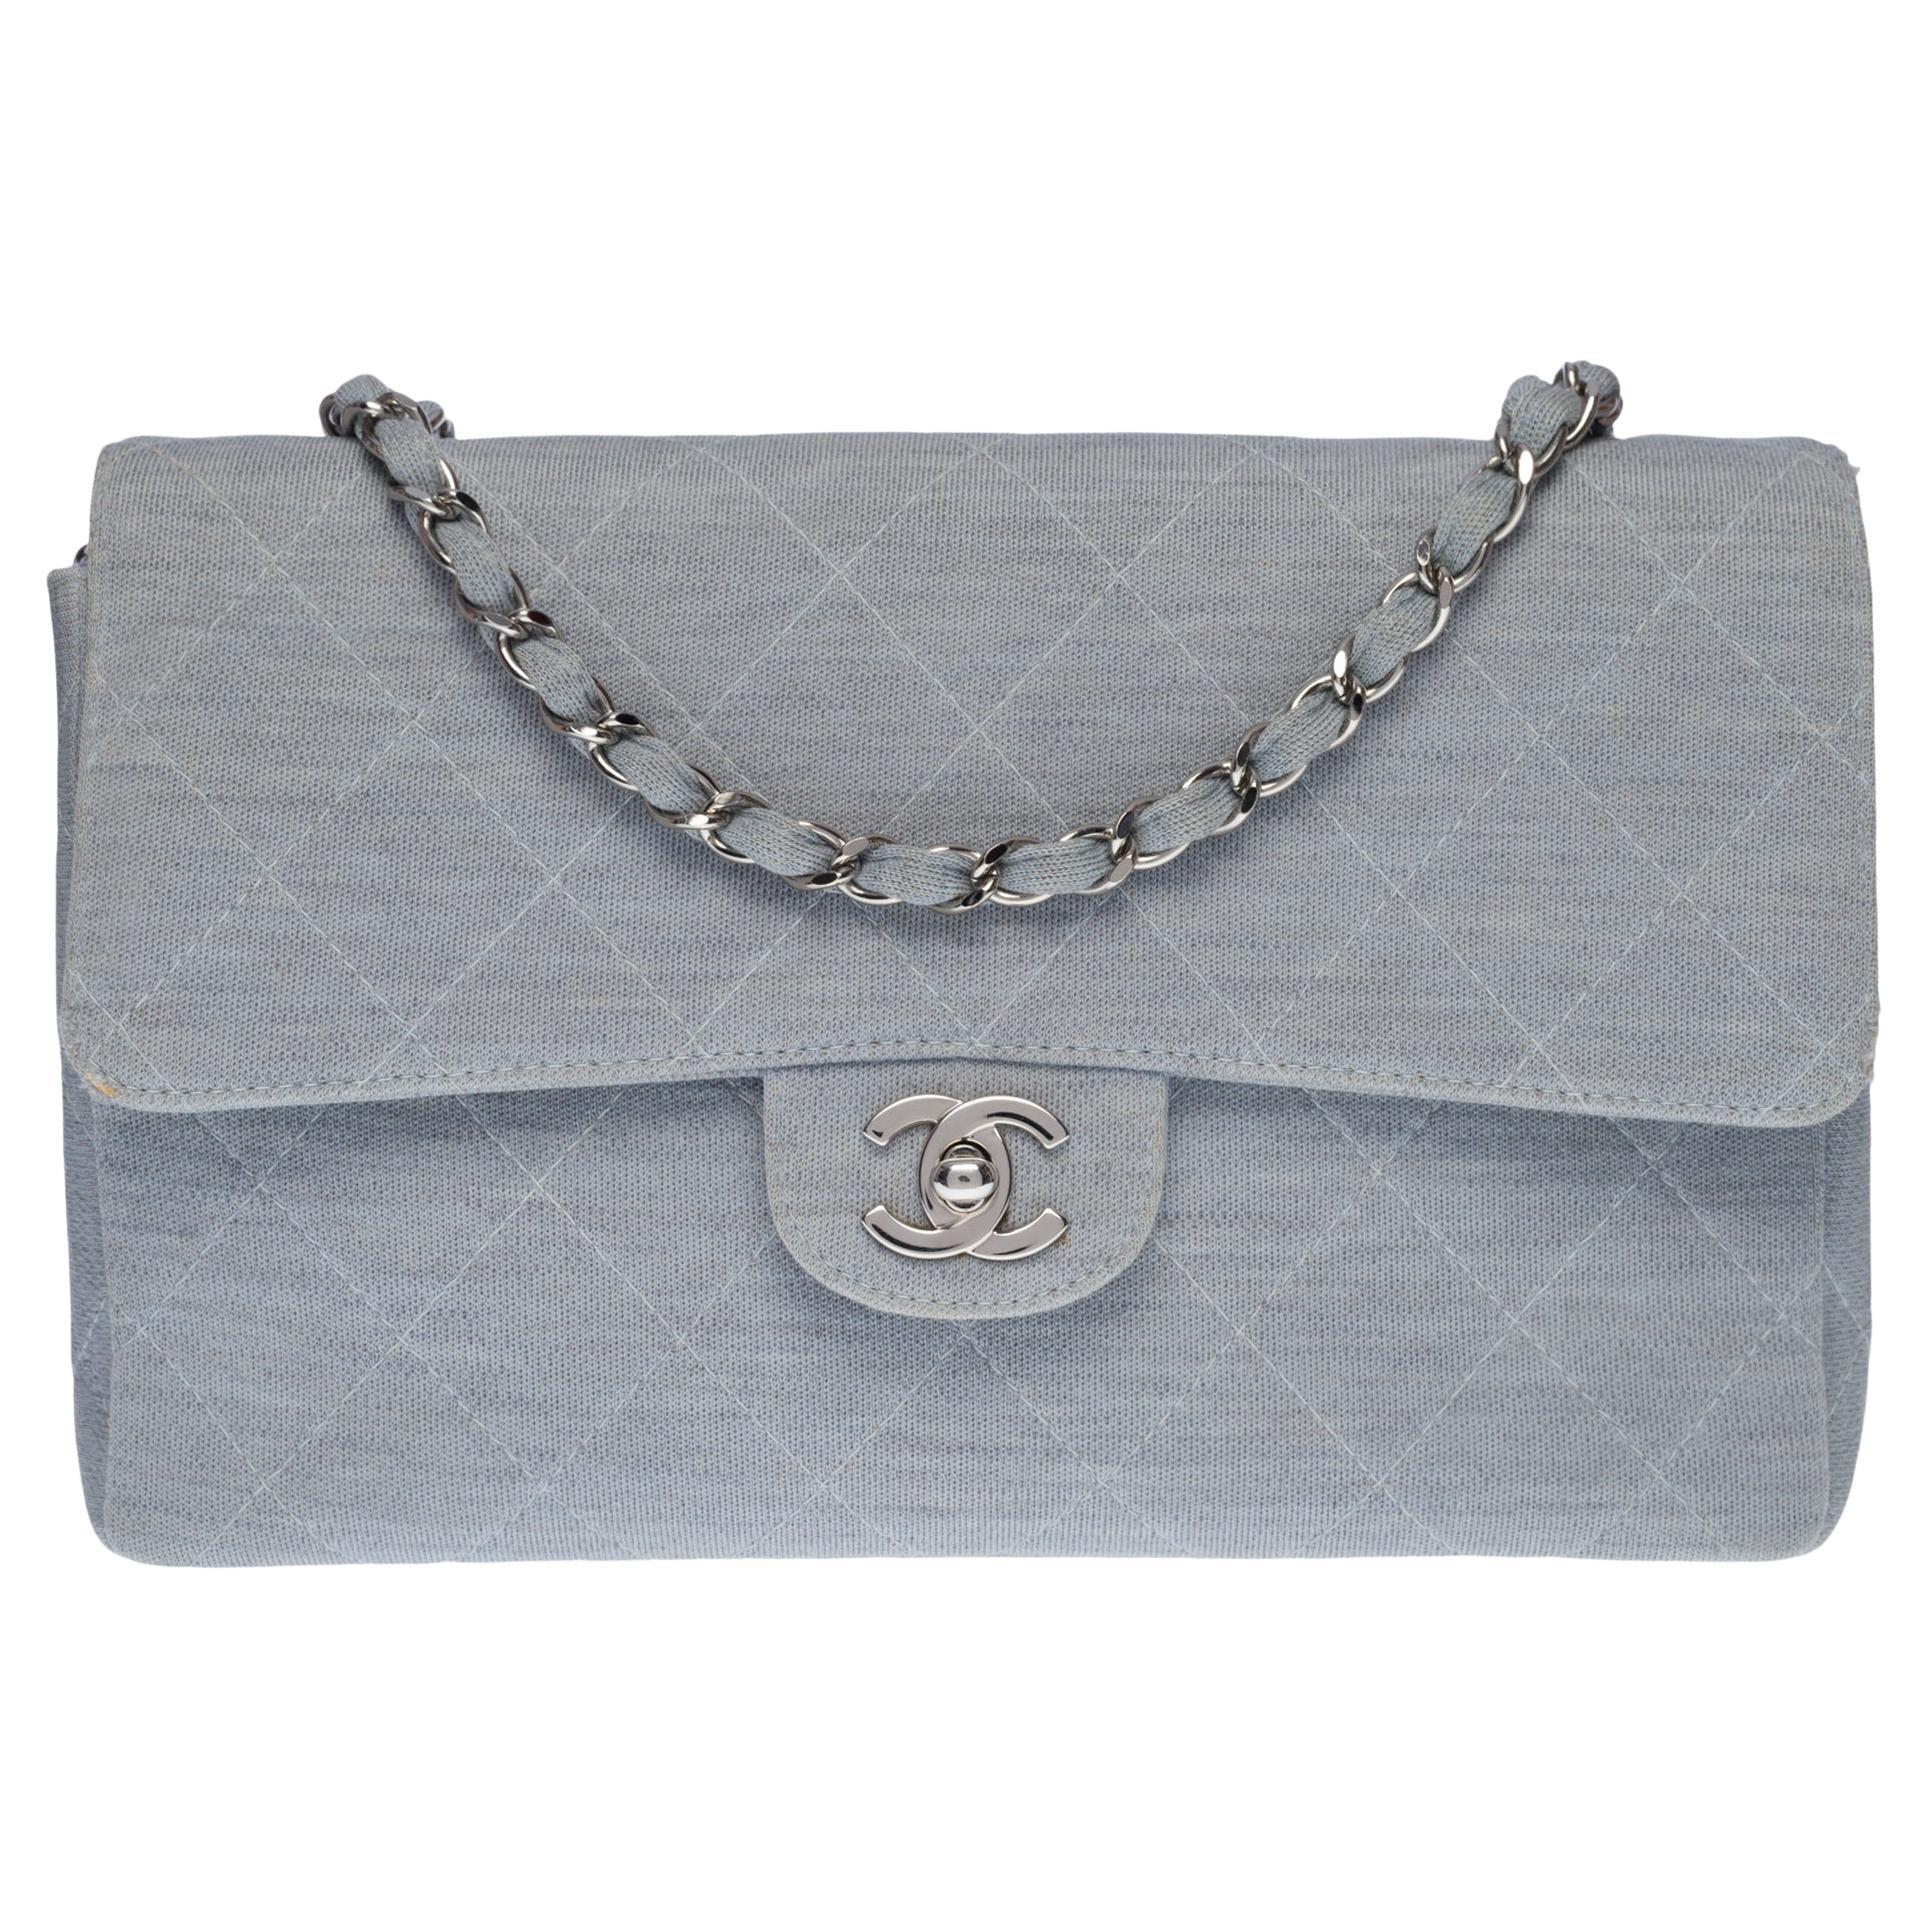 Chanel Timeless shoulder flap bag in blue quilted jersey with silver hardware For Sale